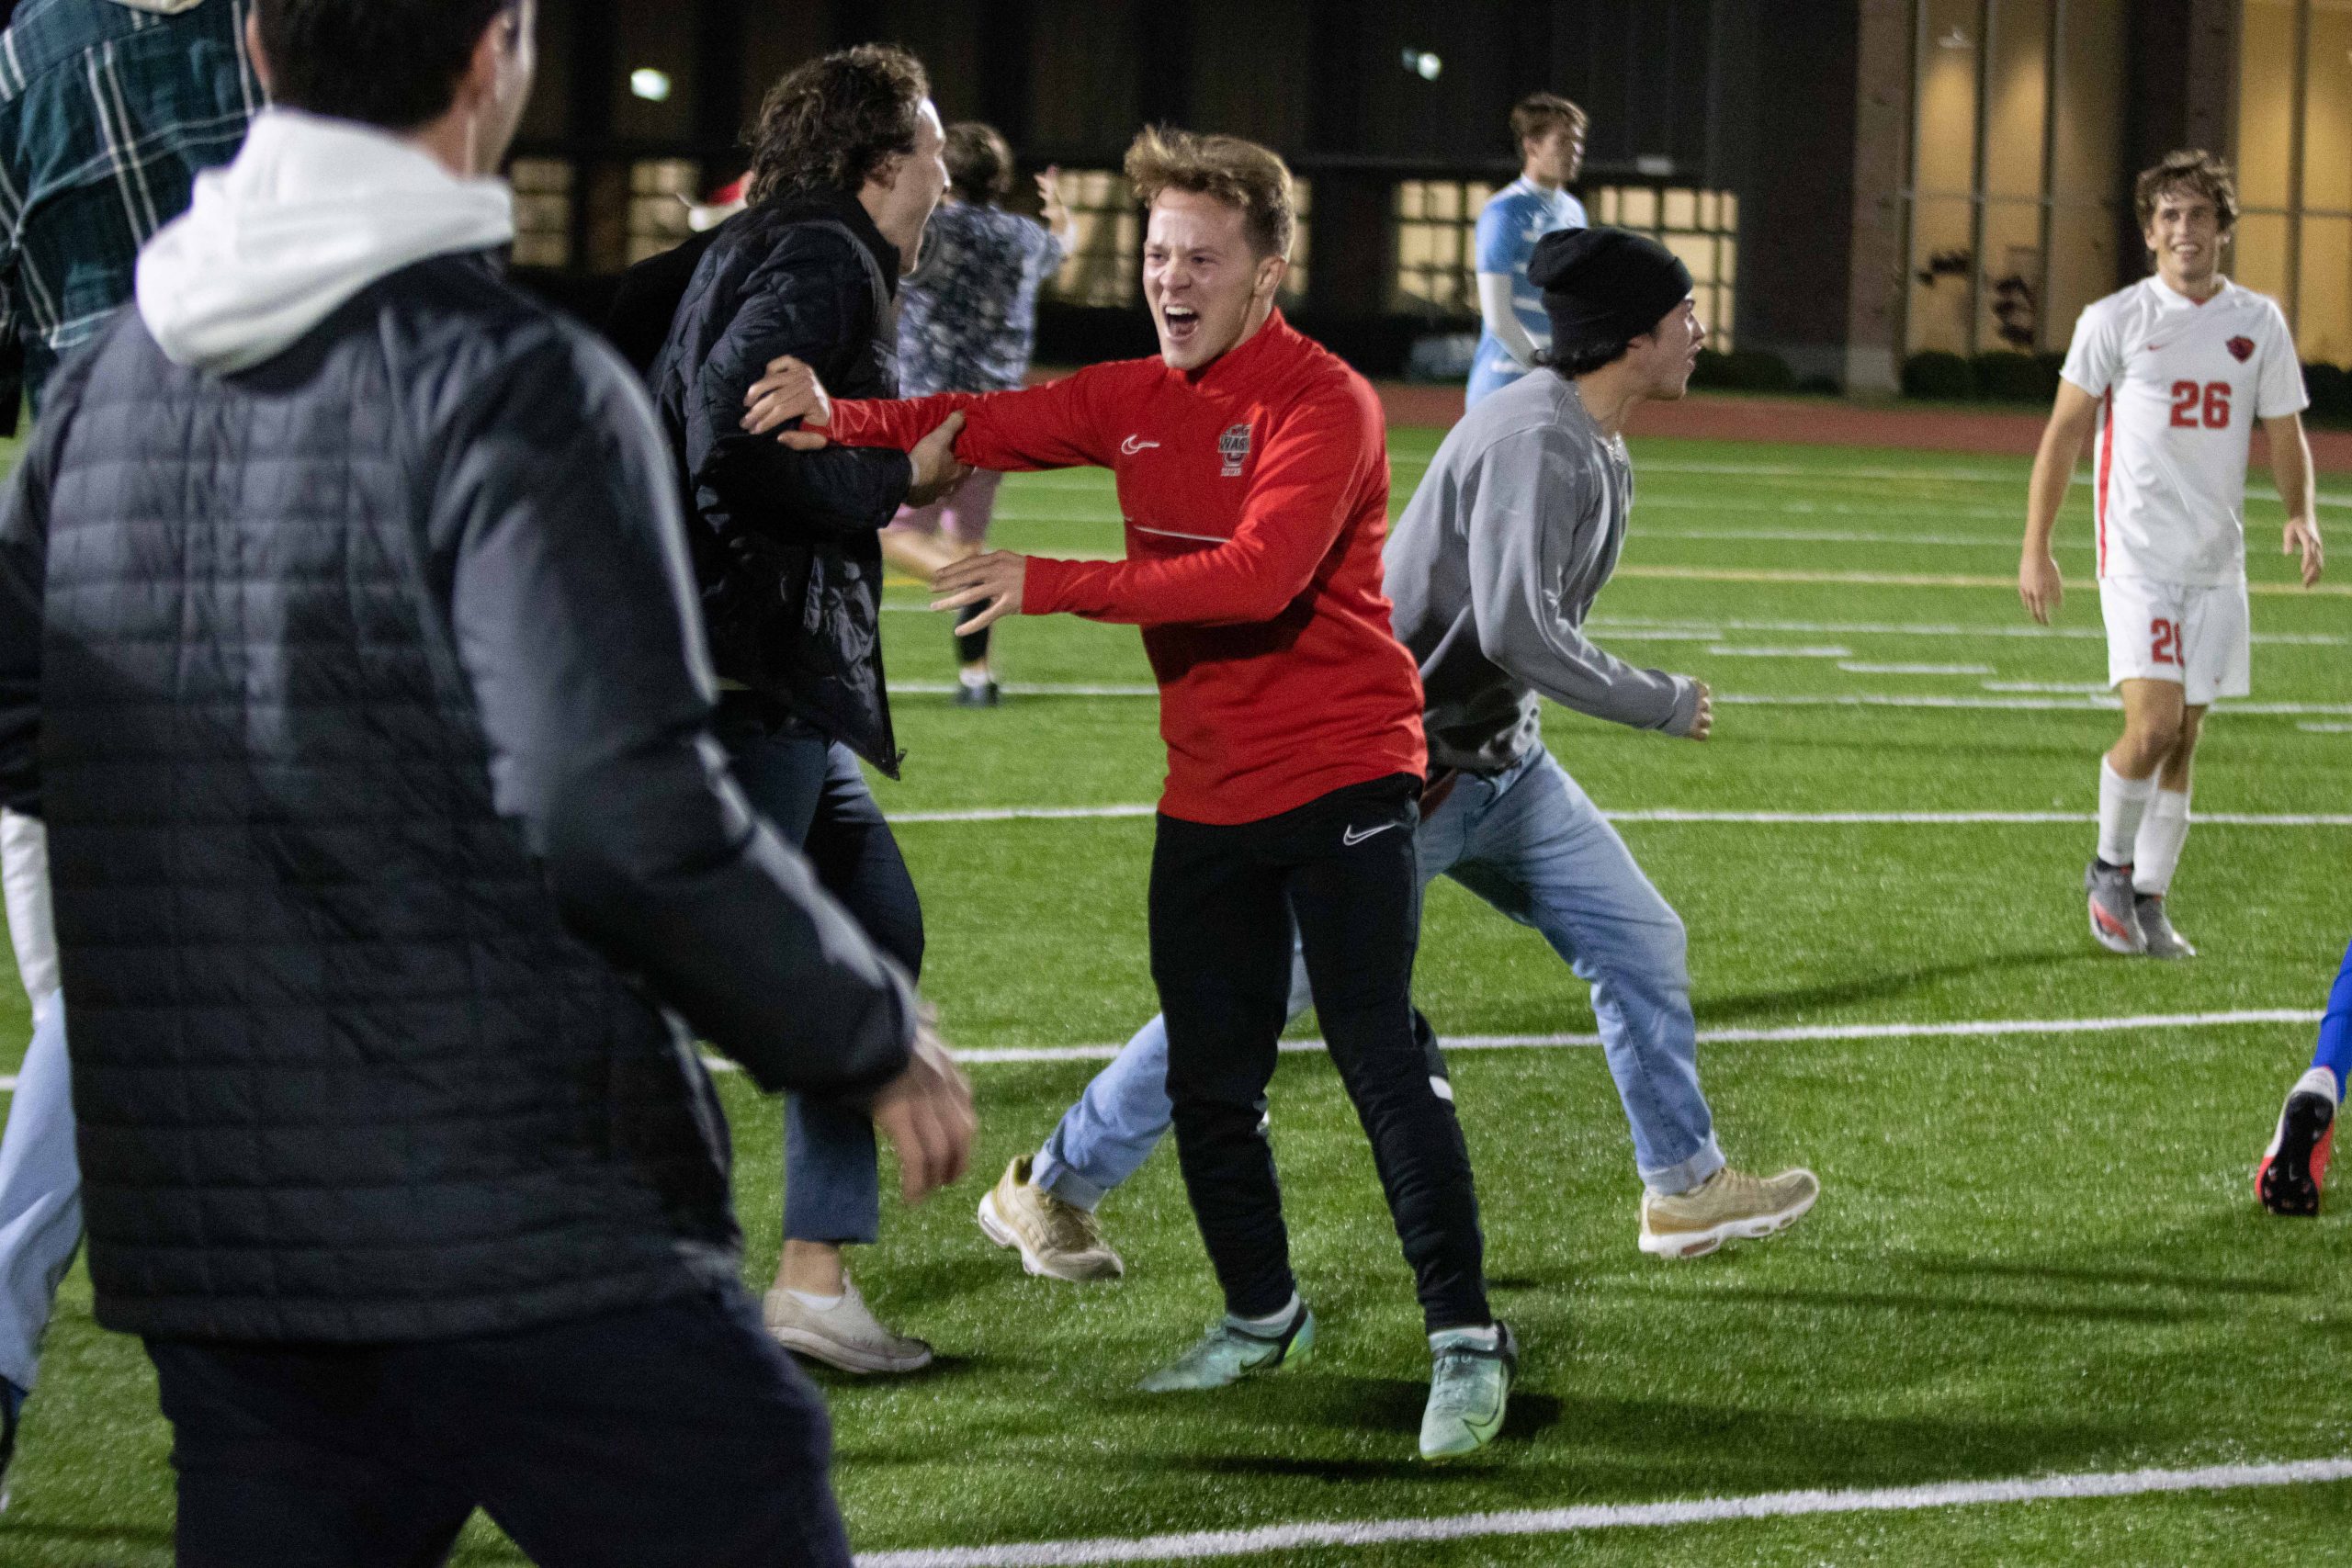 A person in a red shirt and black sweat pants yells happily as other people in non-soccer clothes (jackets and jeans) rush onto the soccer field.